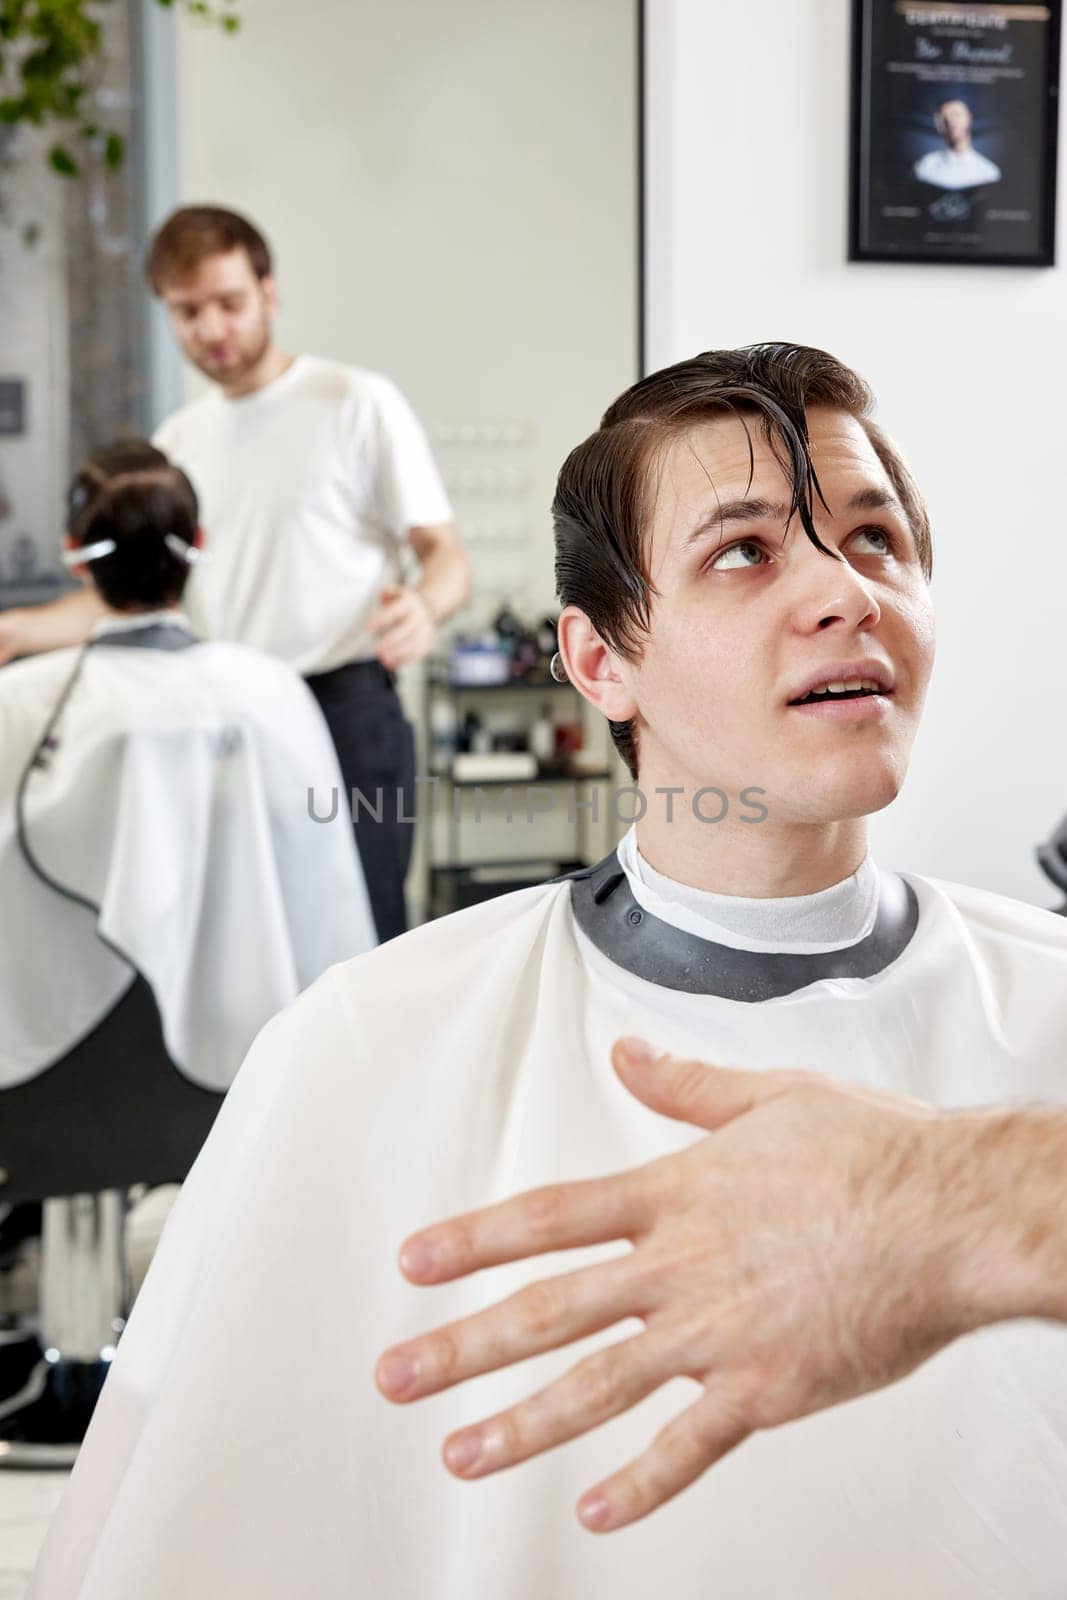 Barber talking to young client man before haircut at barbershop. client tells what haircut he wants